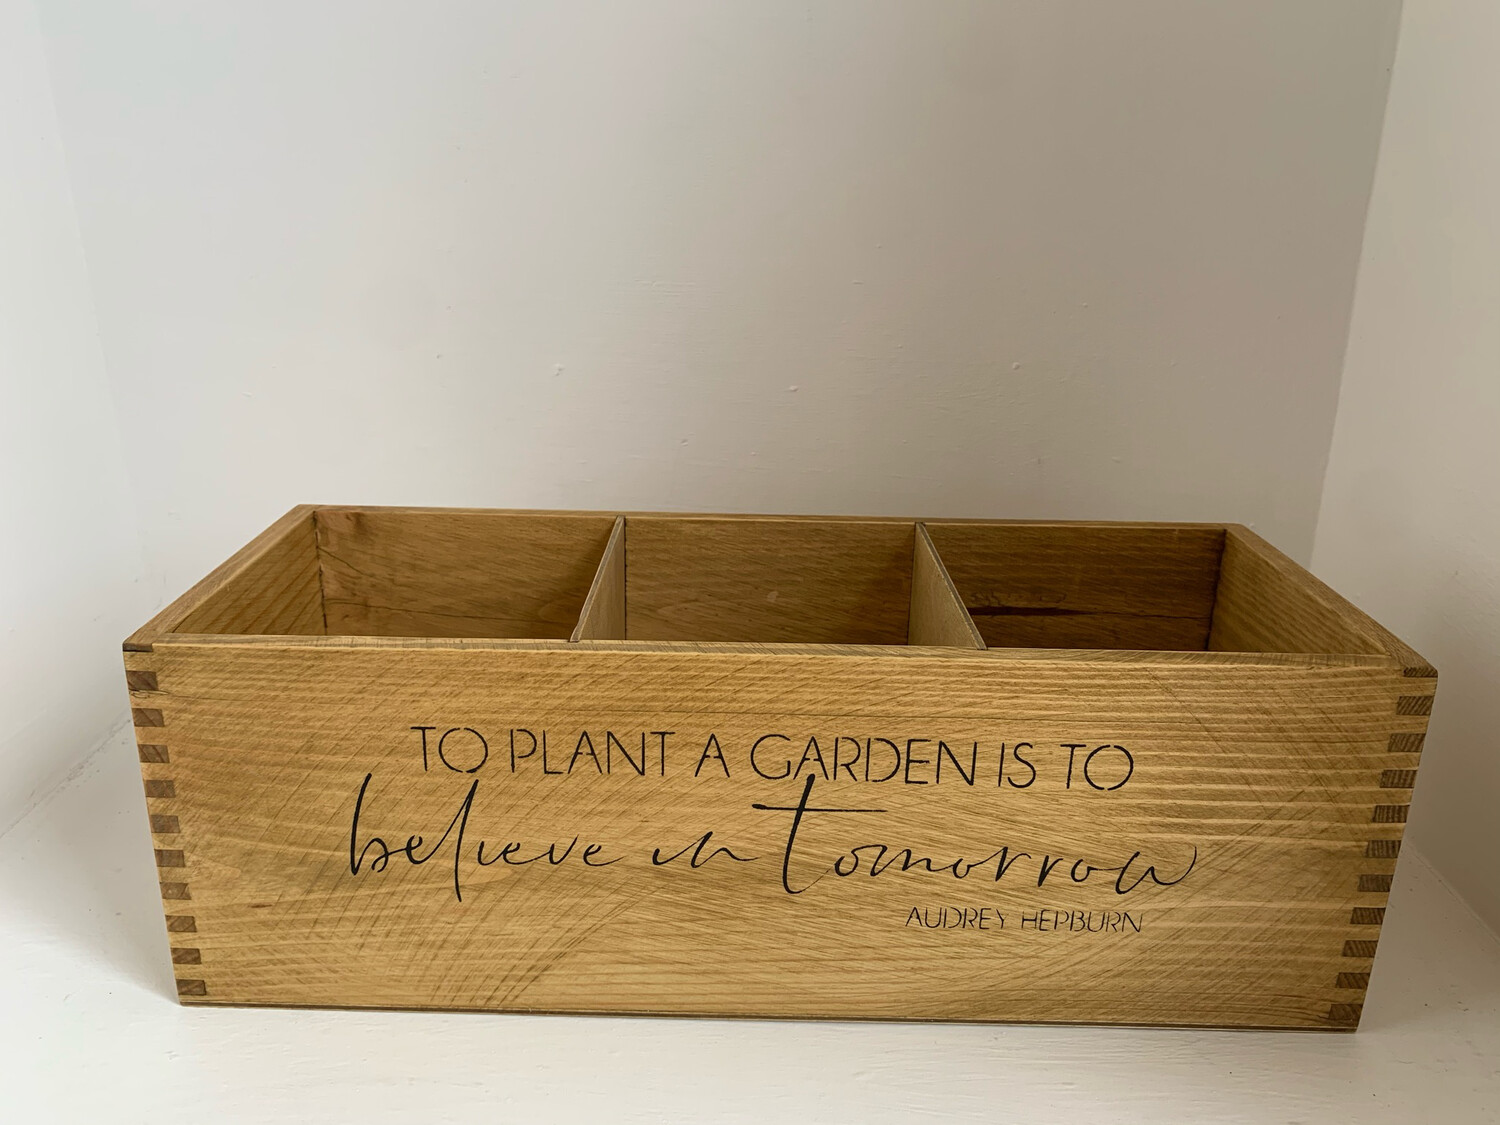 “To Plant A Garden ” Fresh Herb flower planter display window box personalised gift decorative shabby chic wooden box